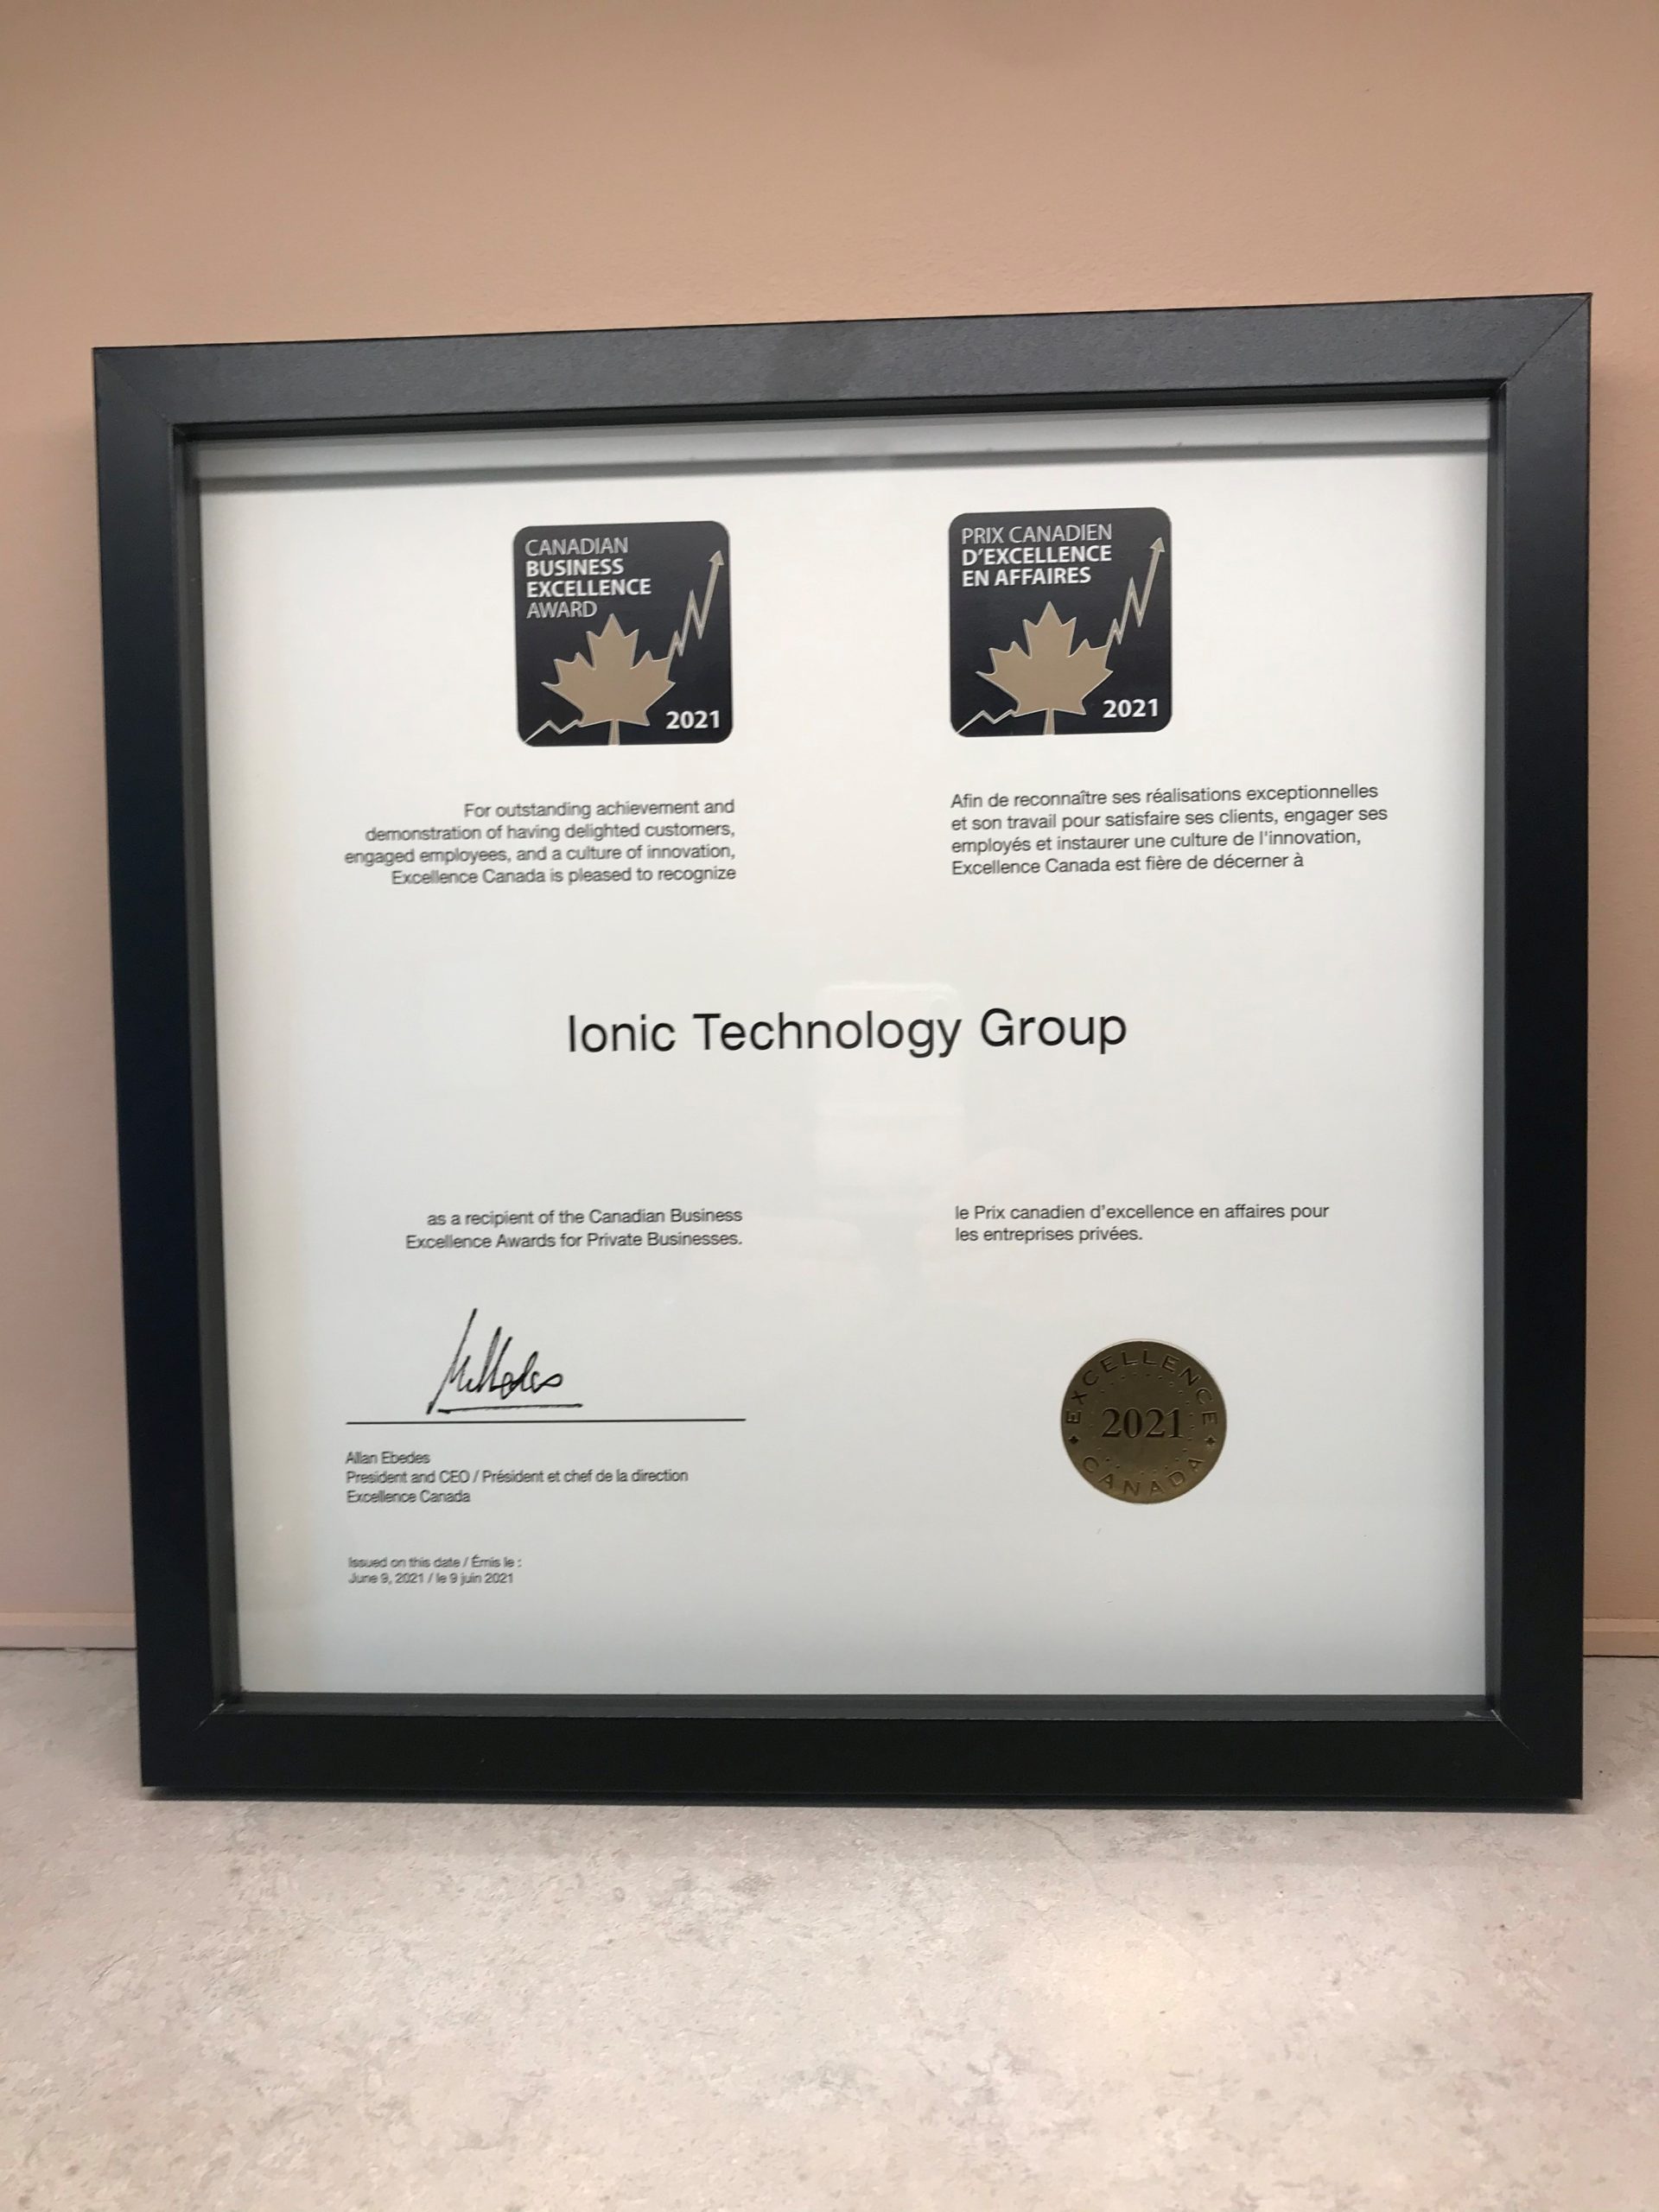 Ionic Technology Group Wins Canadian Business Excellence Award